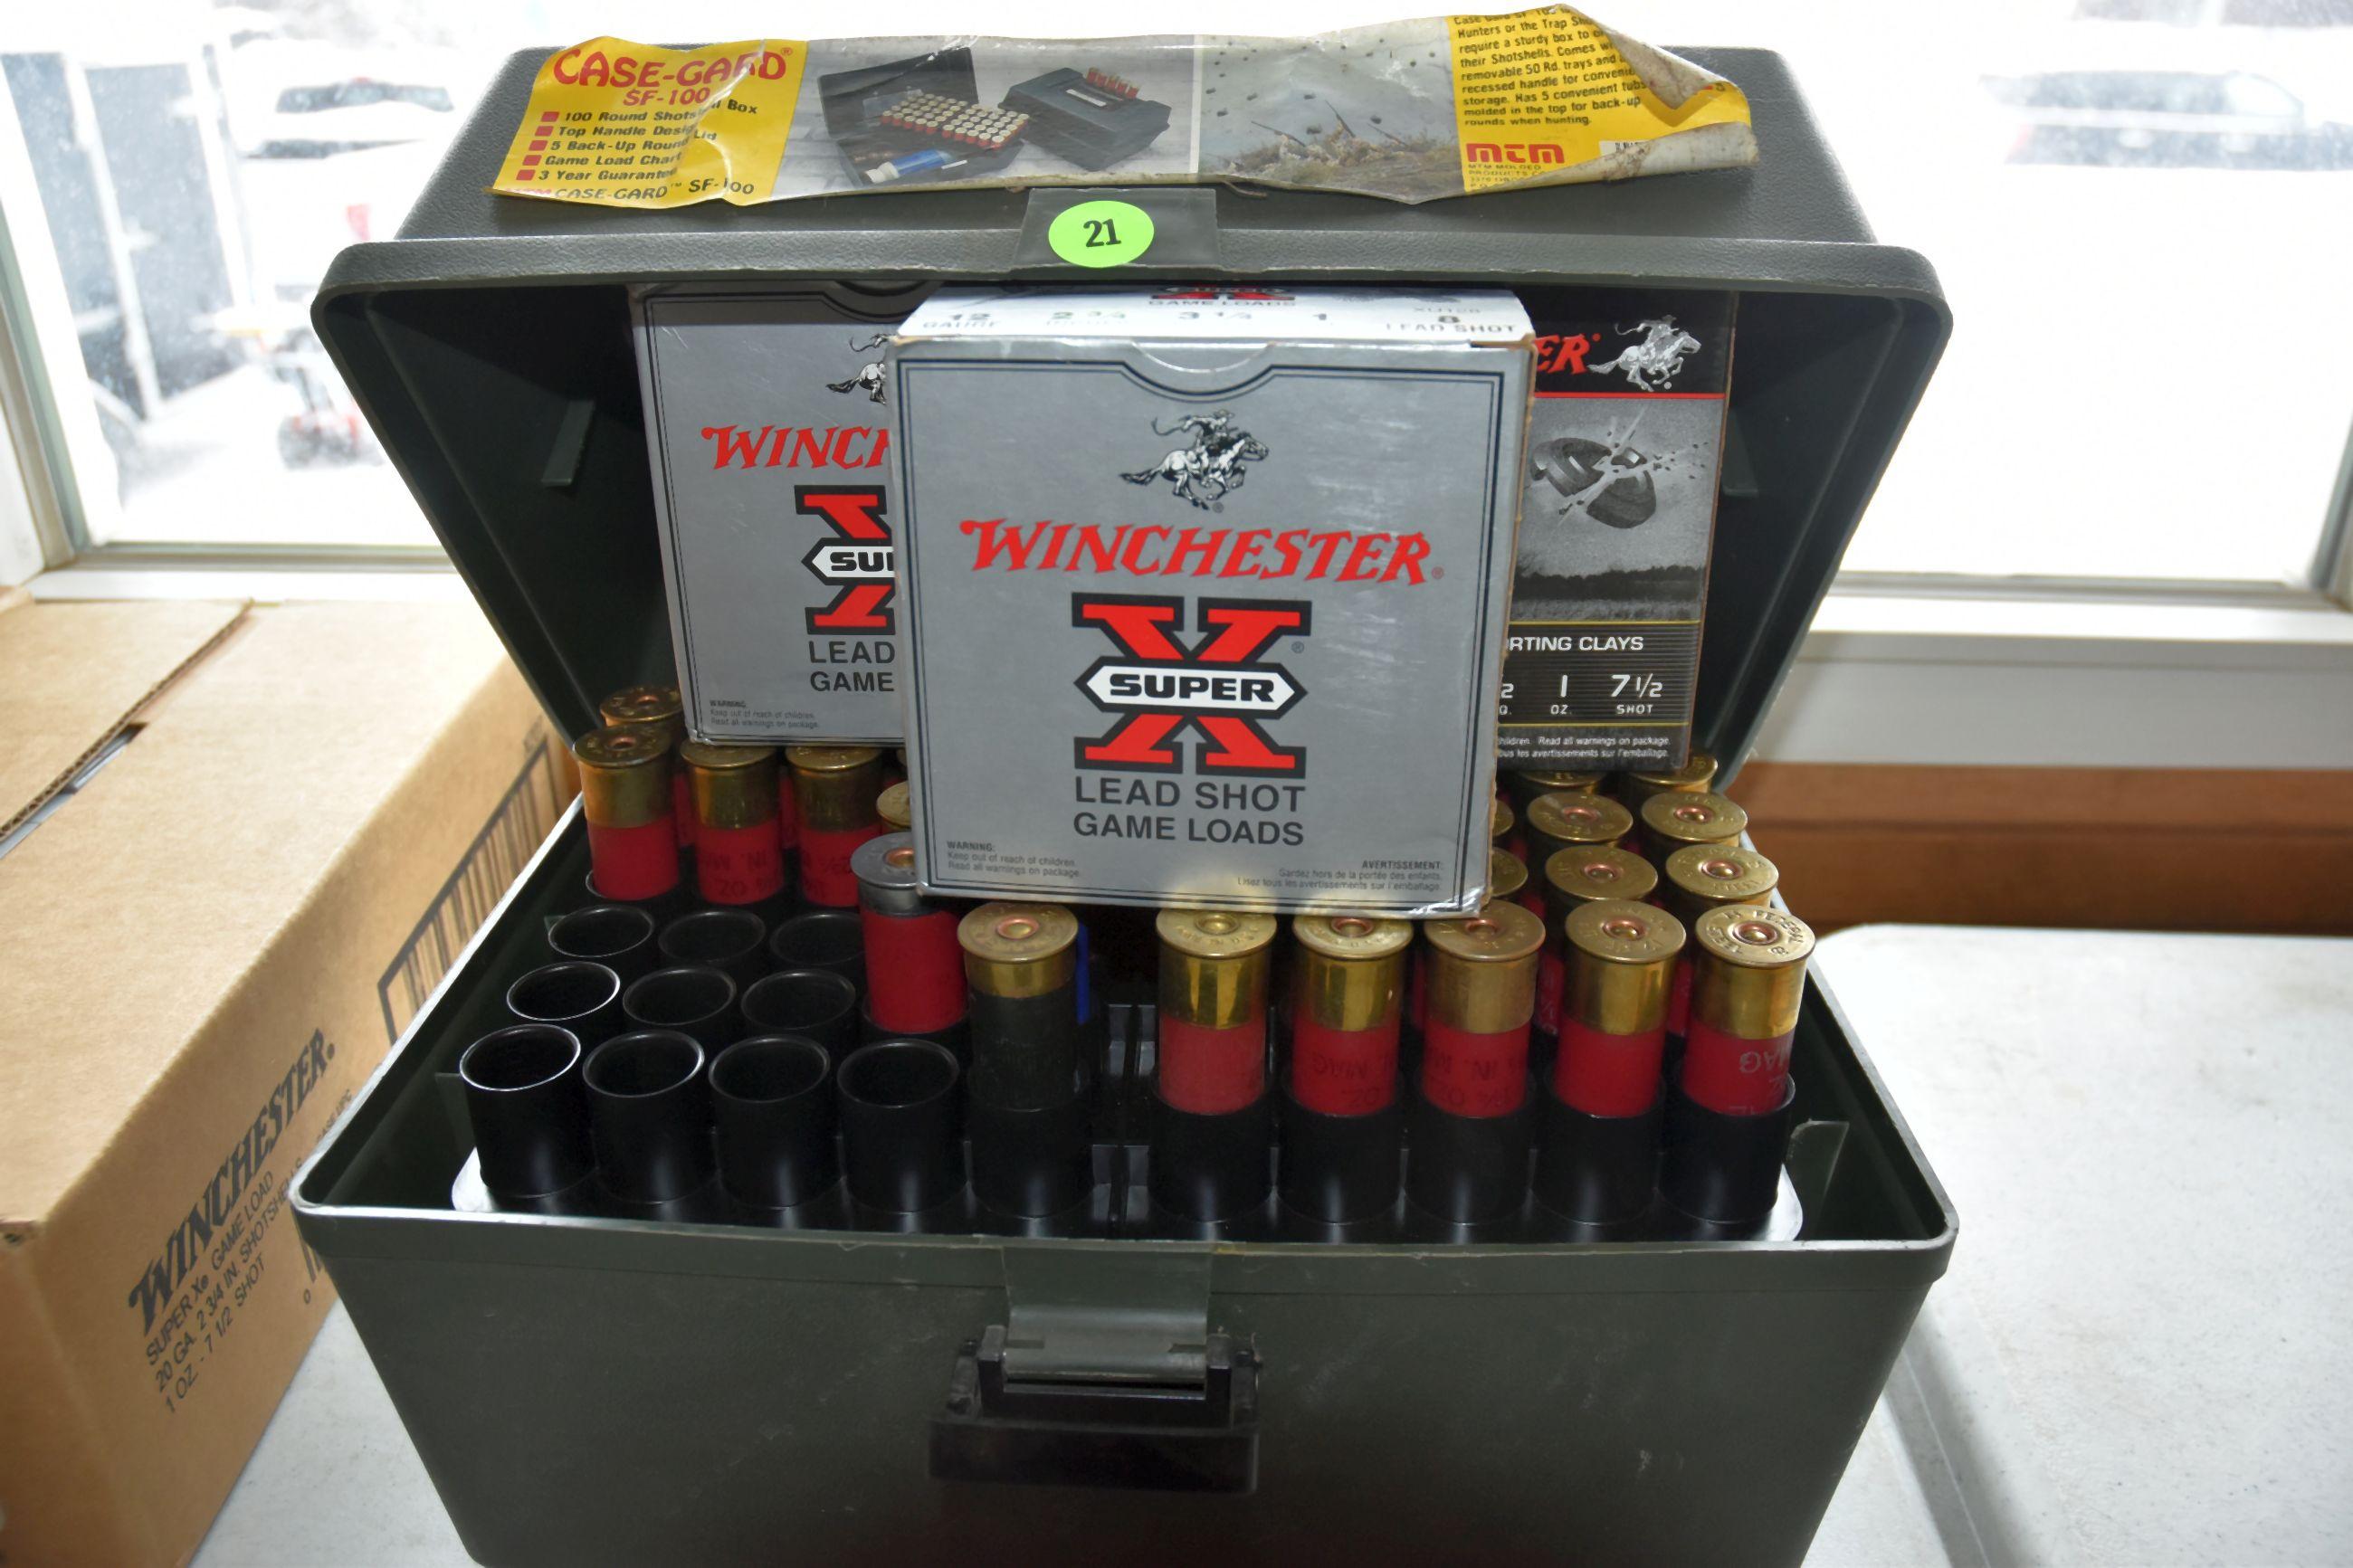 Case-Gard Ammo Box With Federal and Winchester Shells